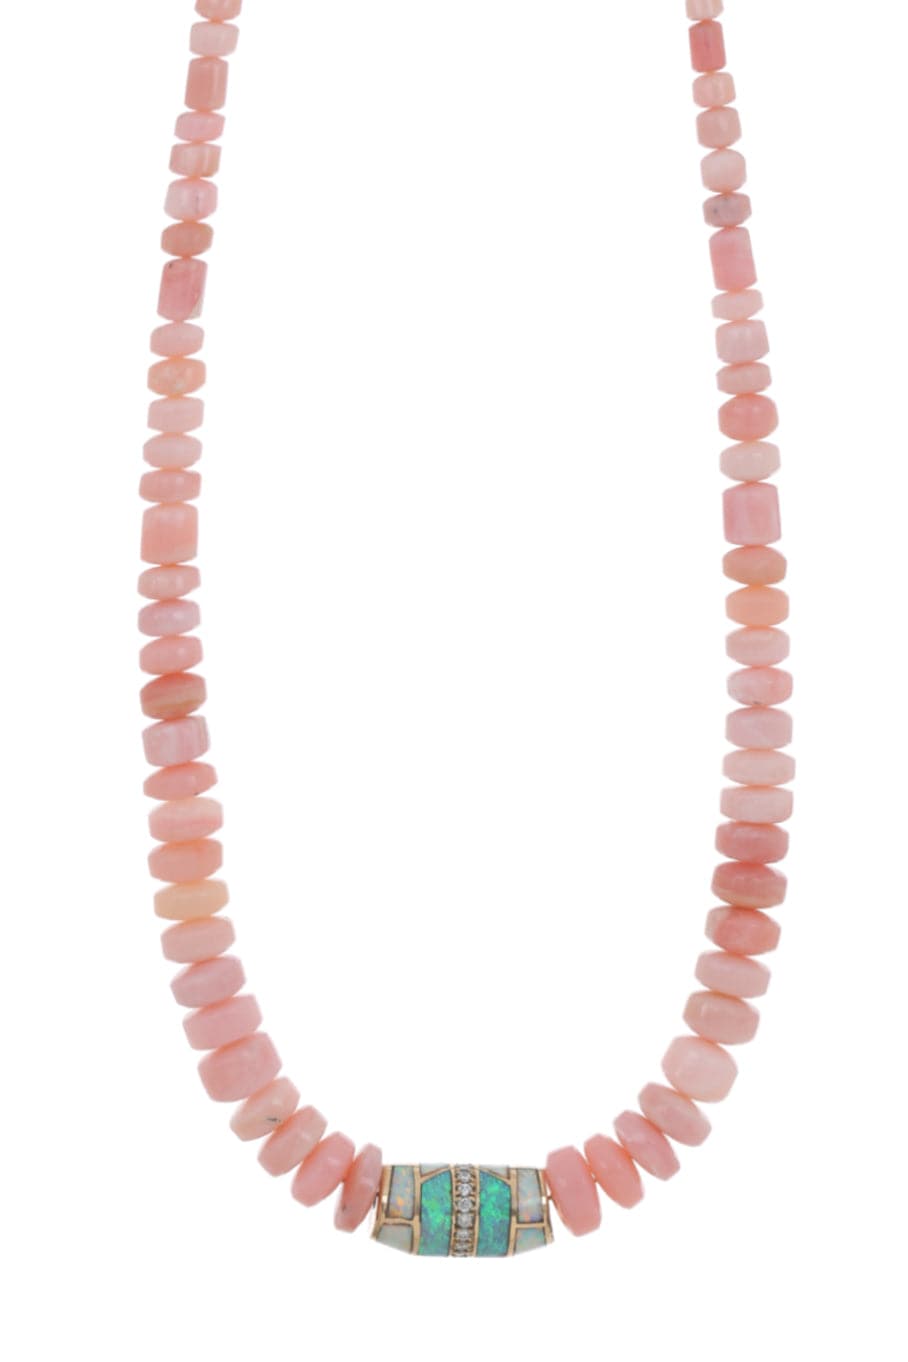 JACQUIE AICHE-Pink Opal Bead Necklace-YELLOW GOLD